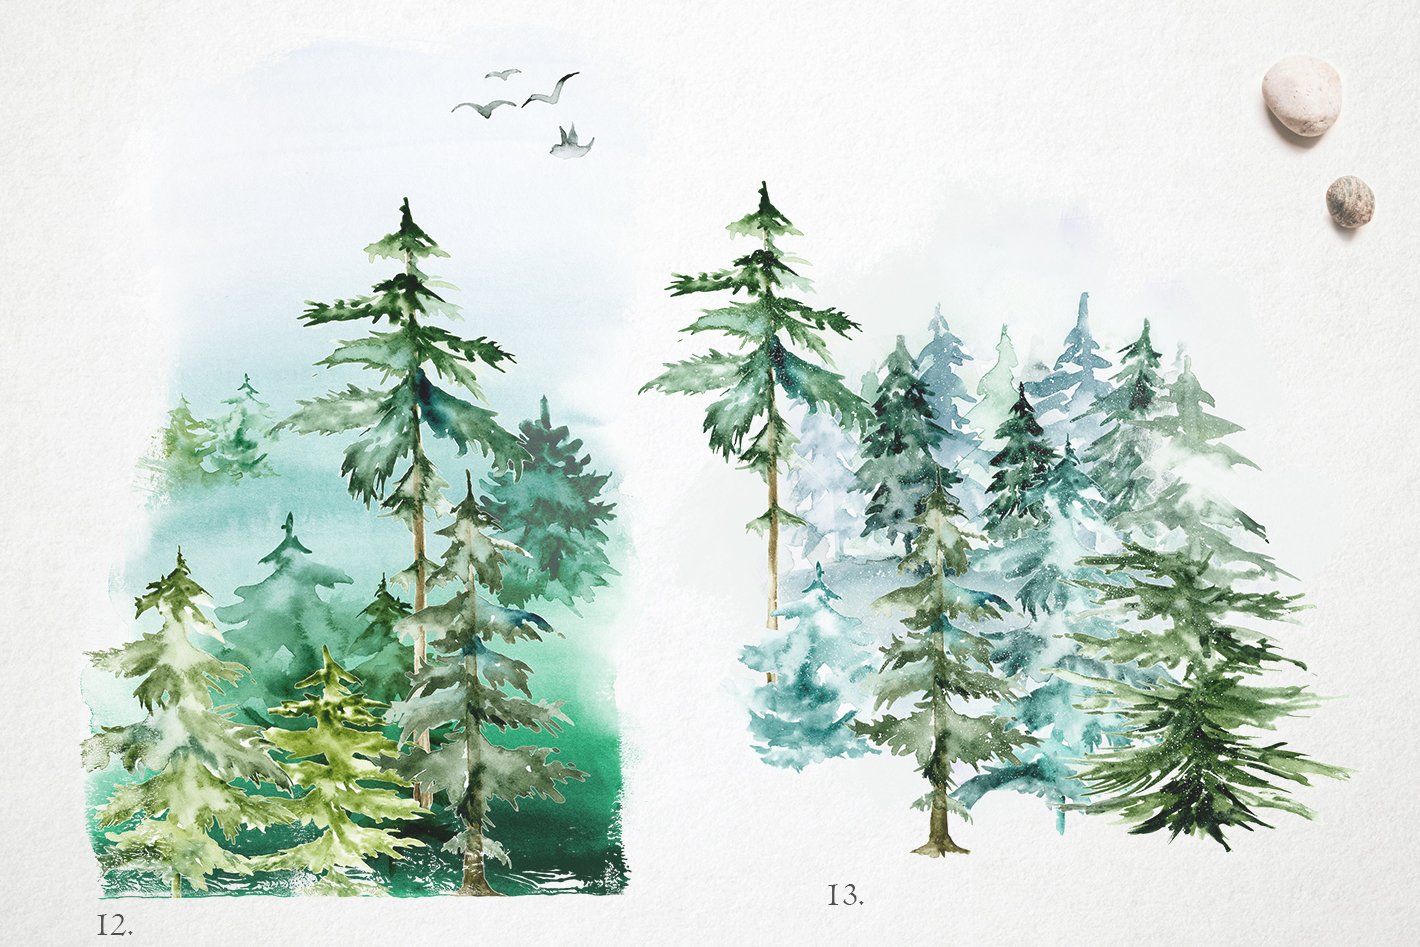 Watercolor painting of trees and birds by Emily Mason.